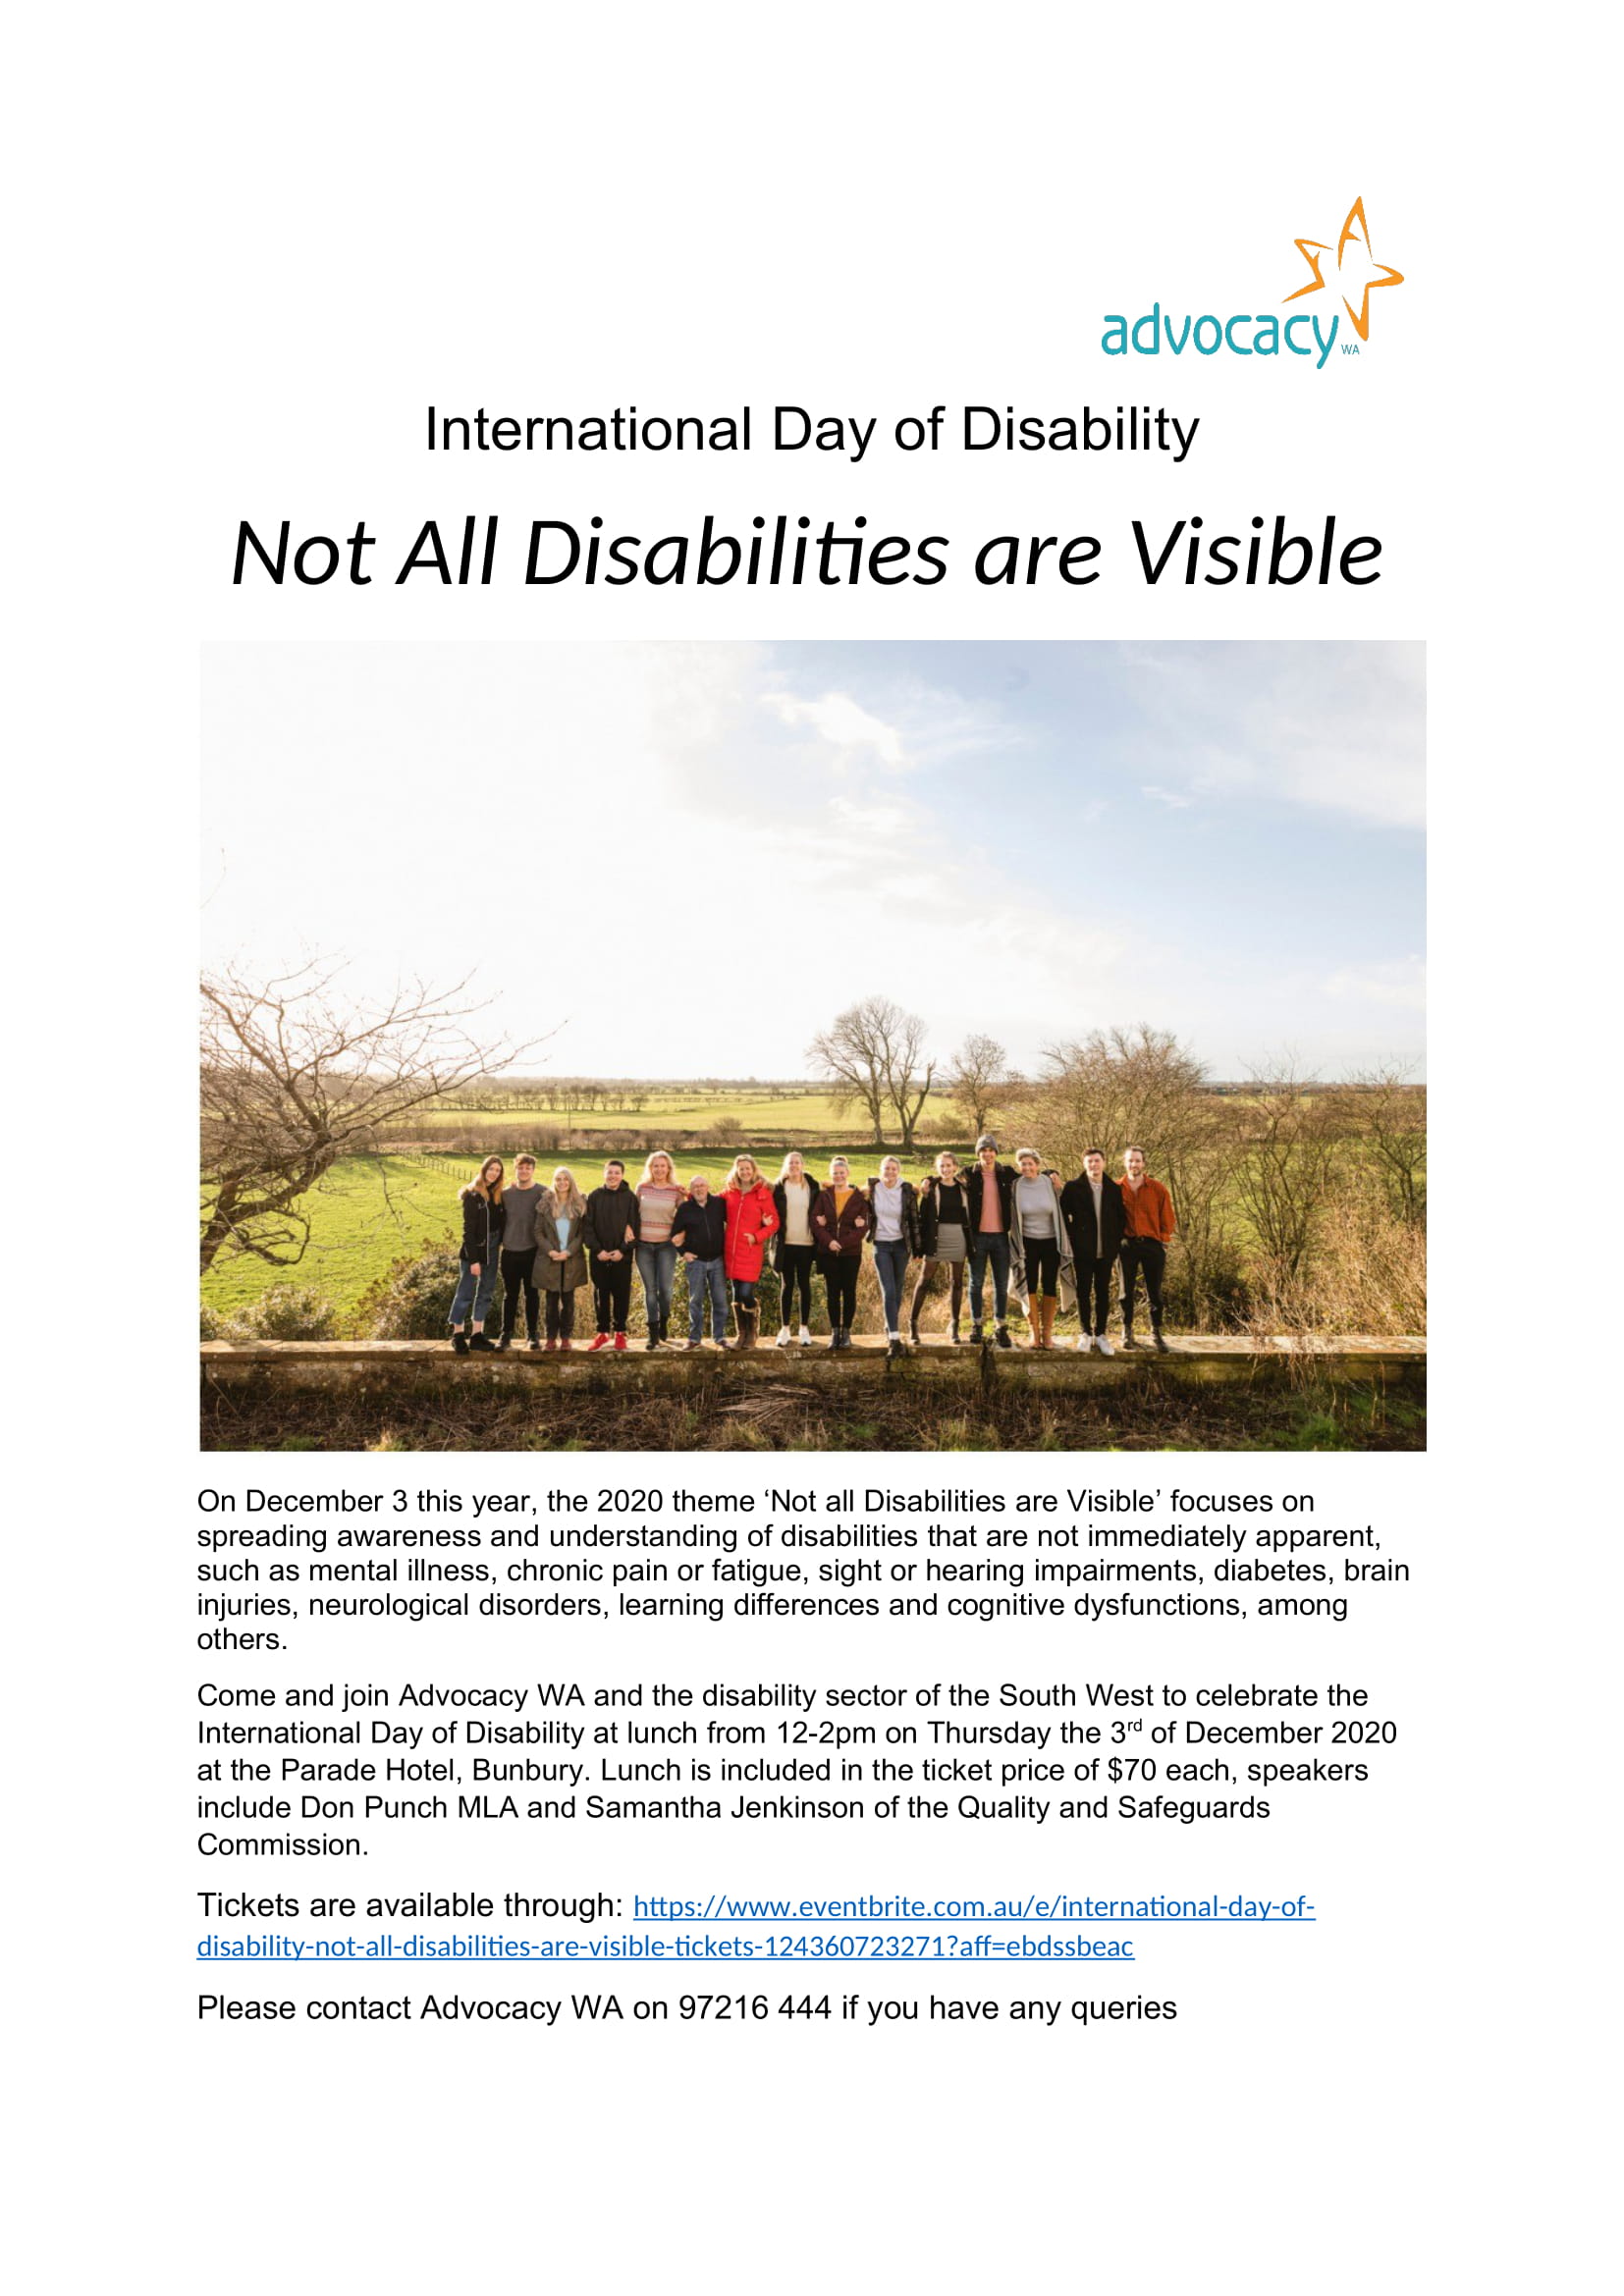 International Day of Disability Lunch Flyer 2020 004 1